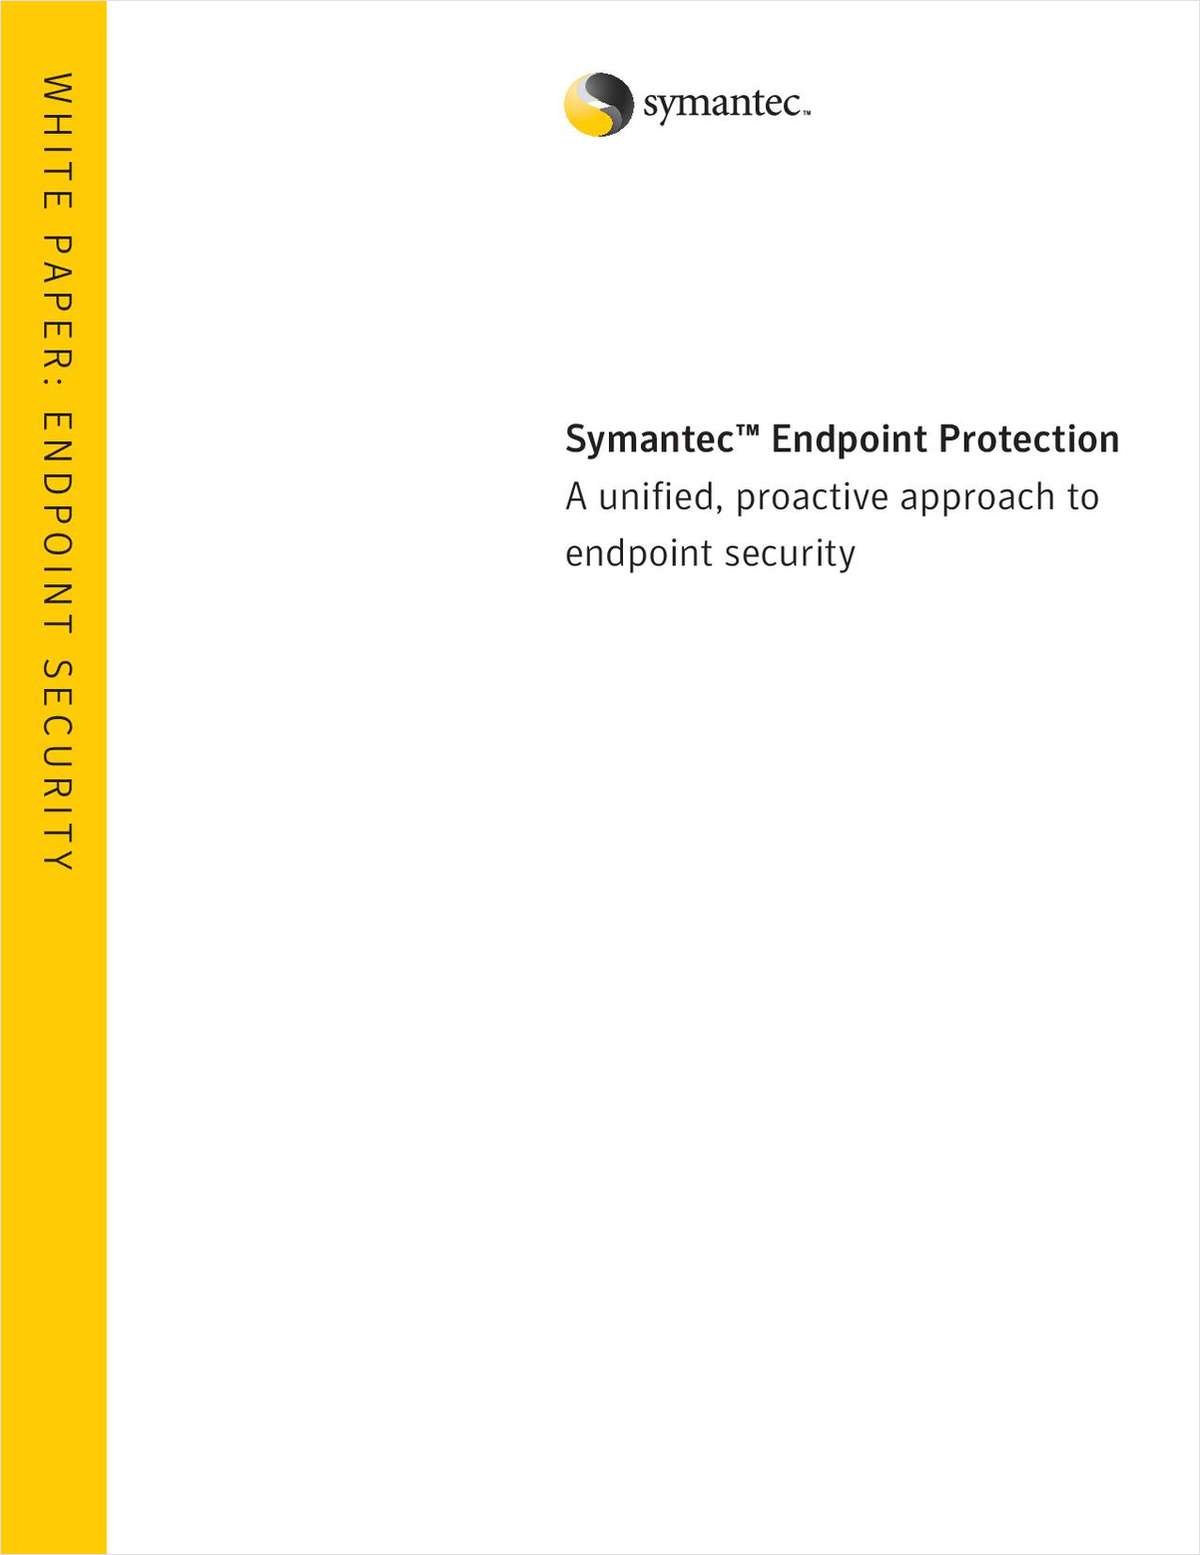 Symantec™ Endpoint Protection: A Unified, Proactive Approach to Endpoint Security